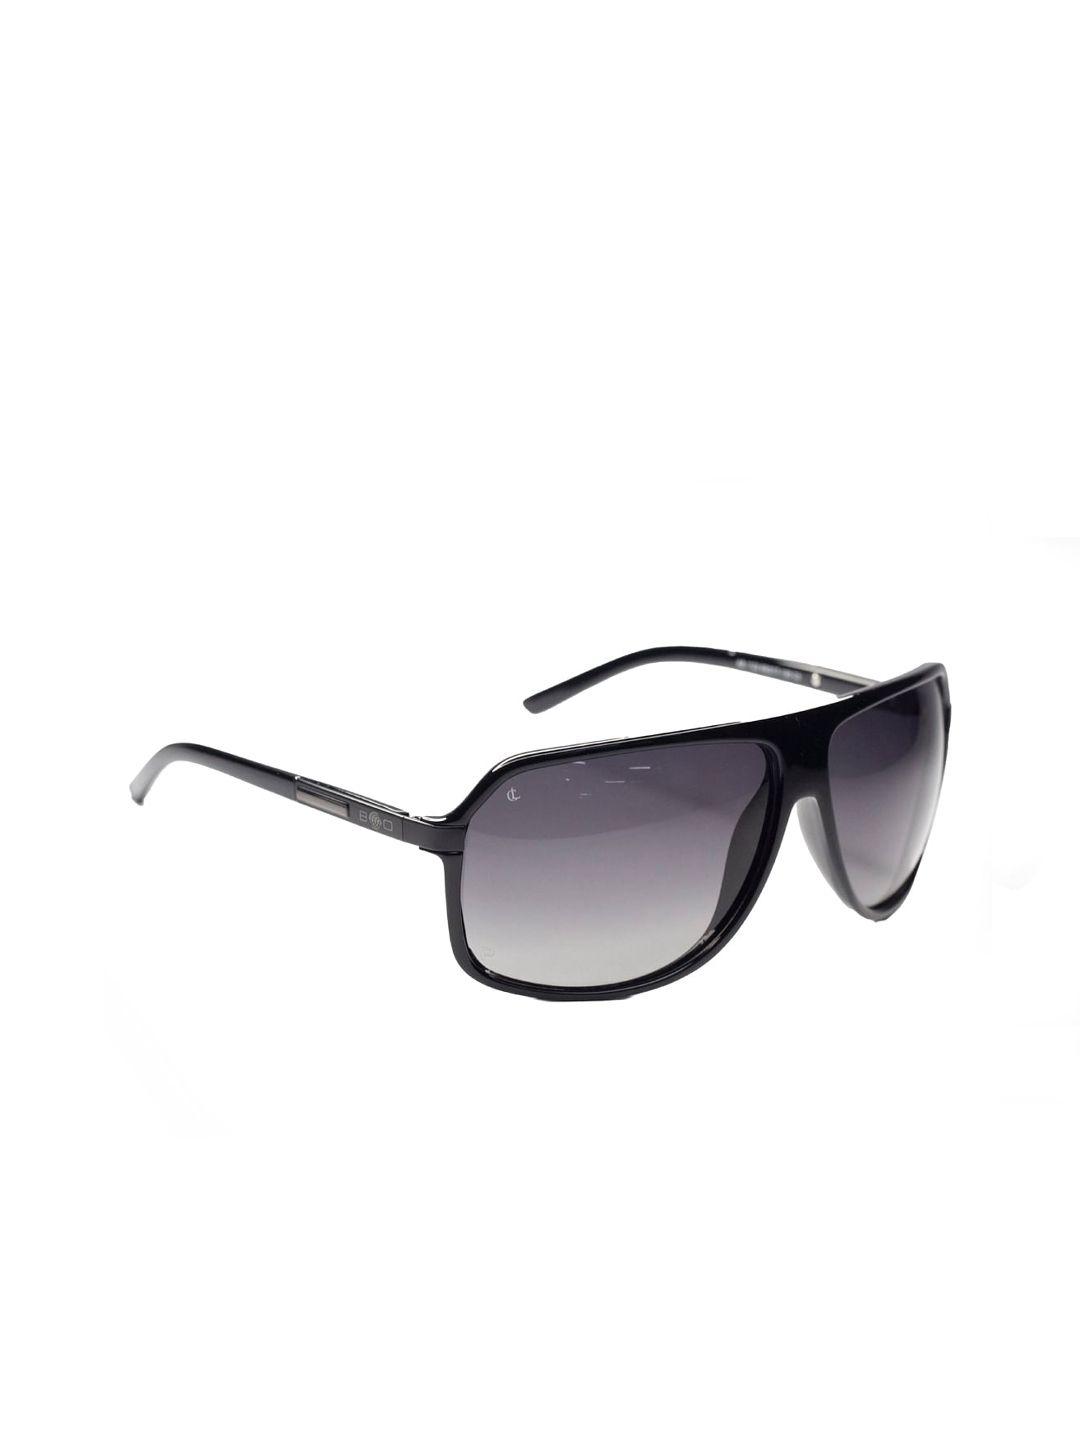 charles london unisex grey lens & black sunglasses with uv protected lens ab 1122 c3 63 s